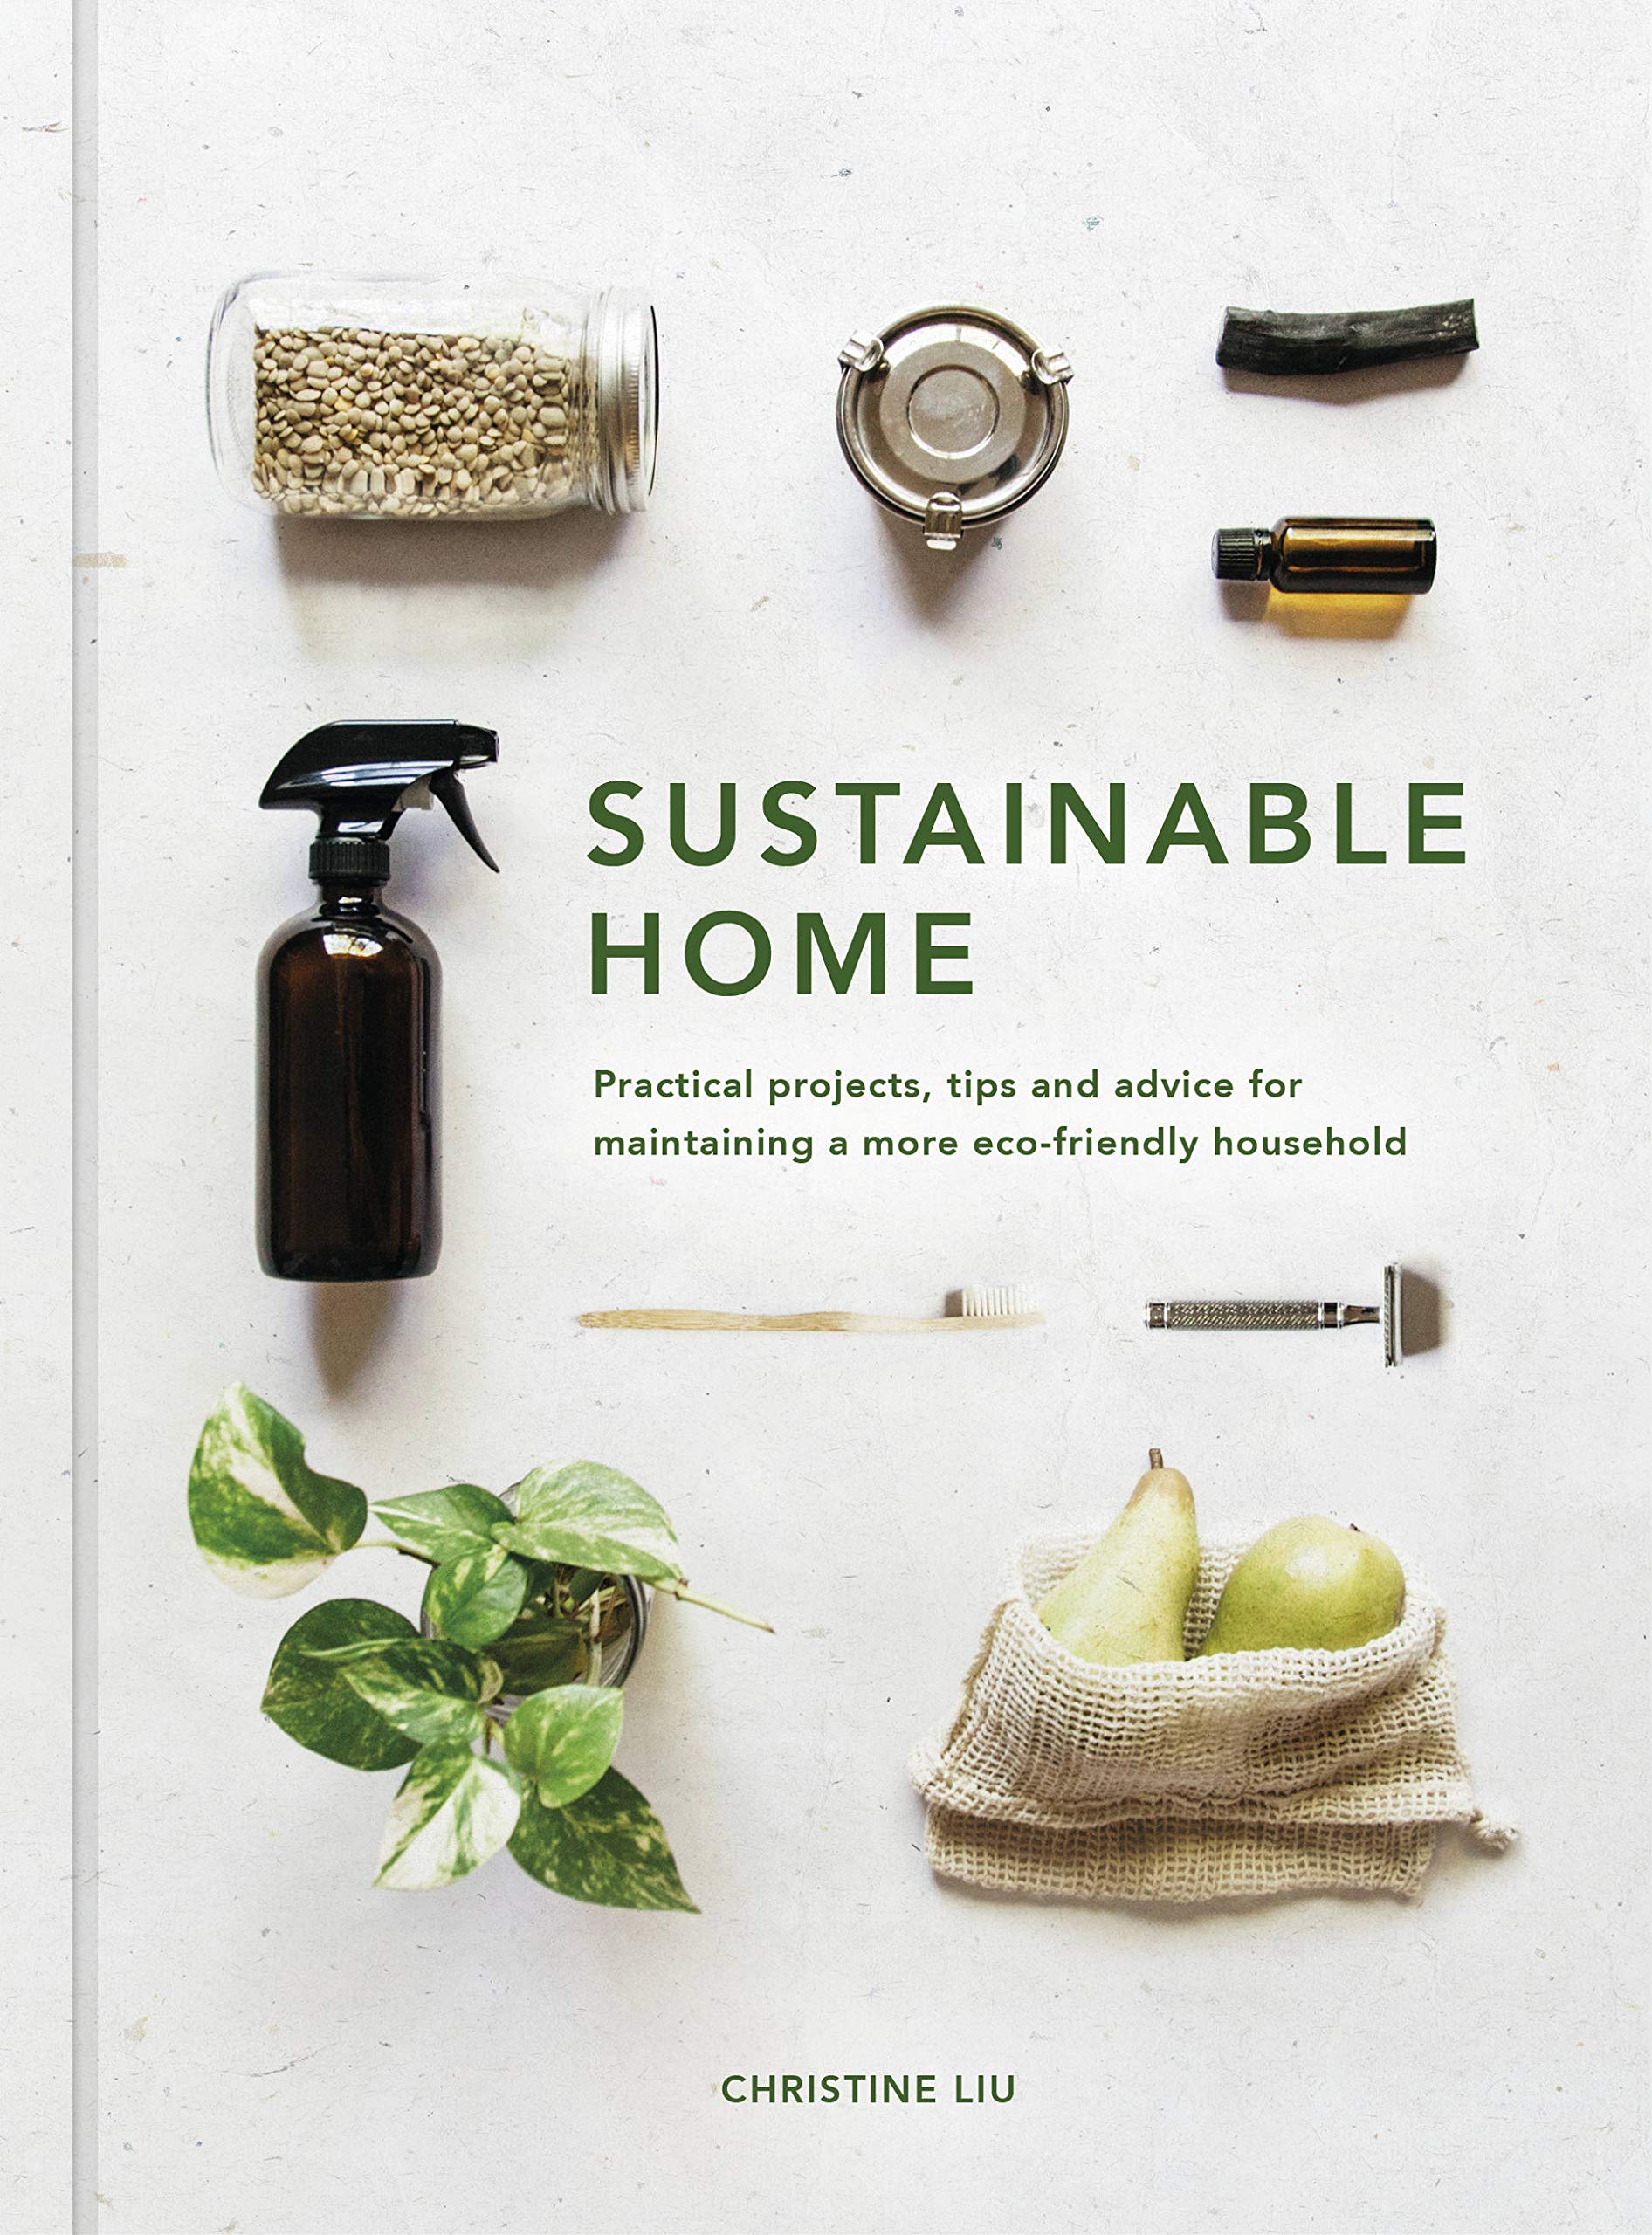 Sustainable Home Book by Christine Liu